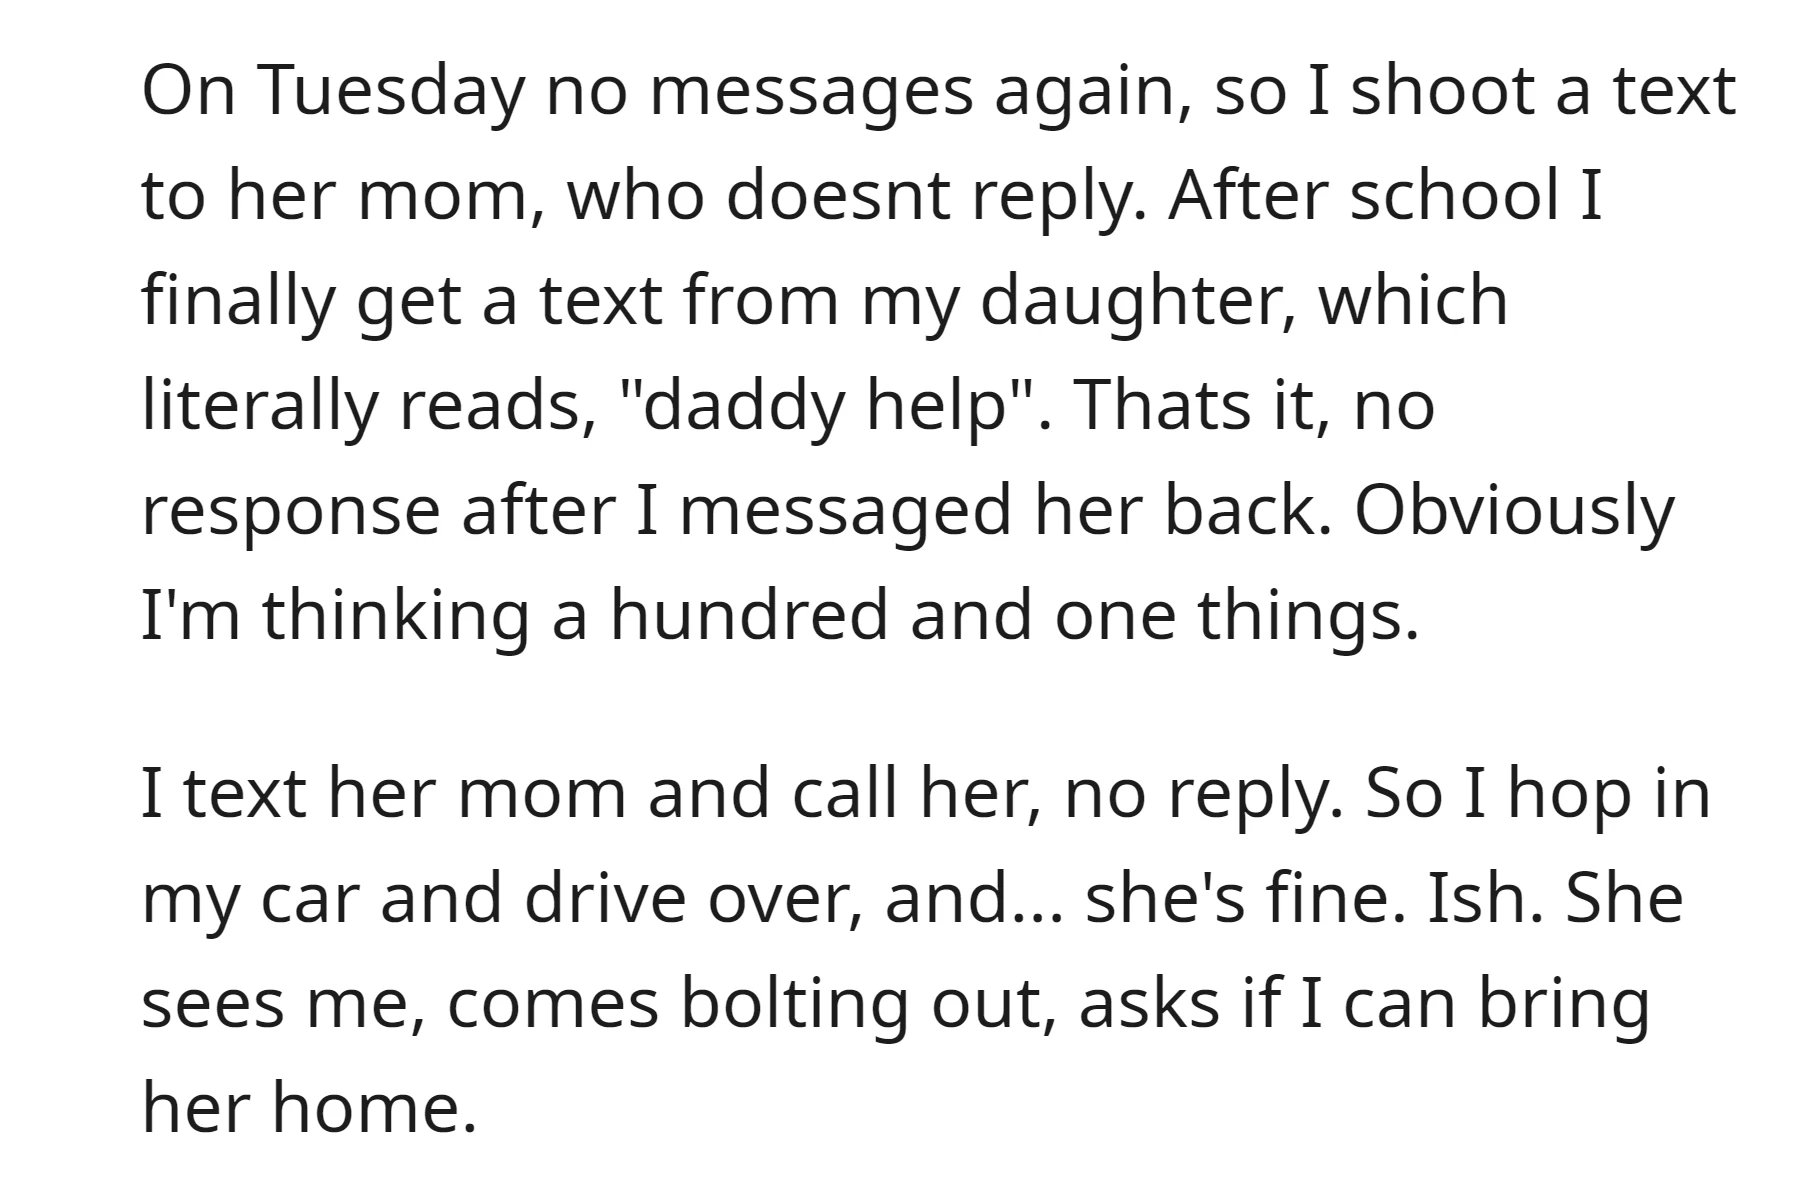 OP contacted her mom without a response, drove to his ex's place